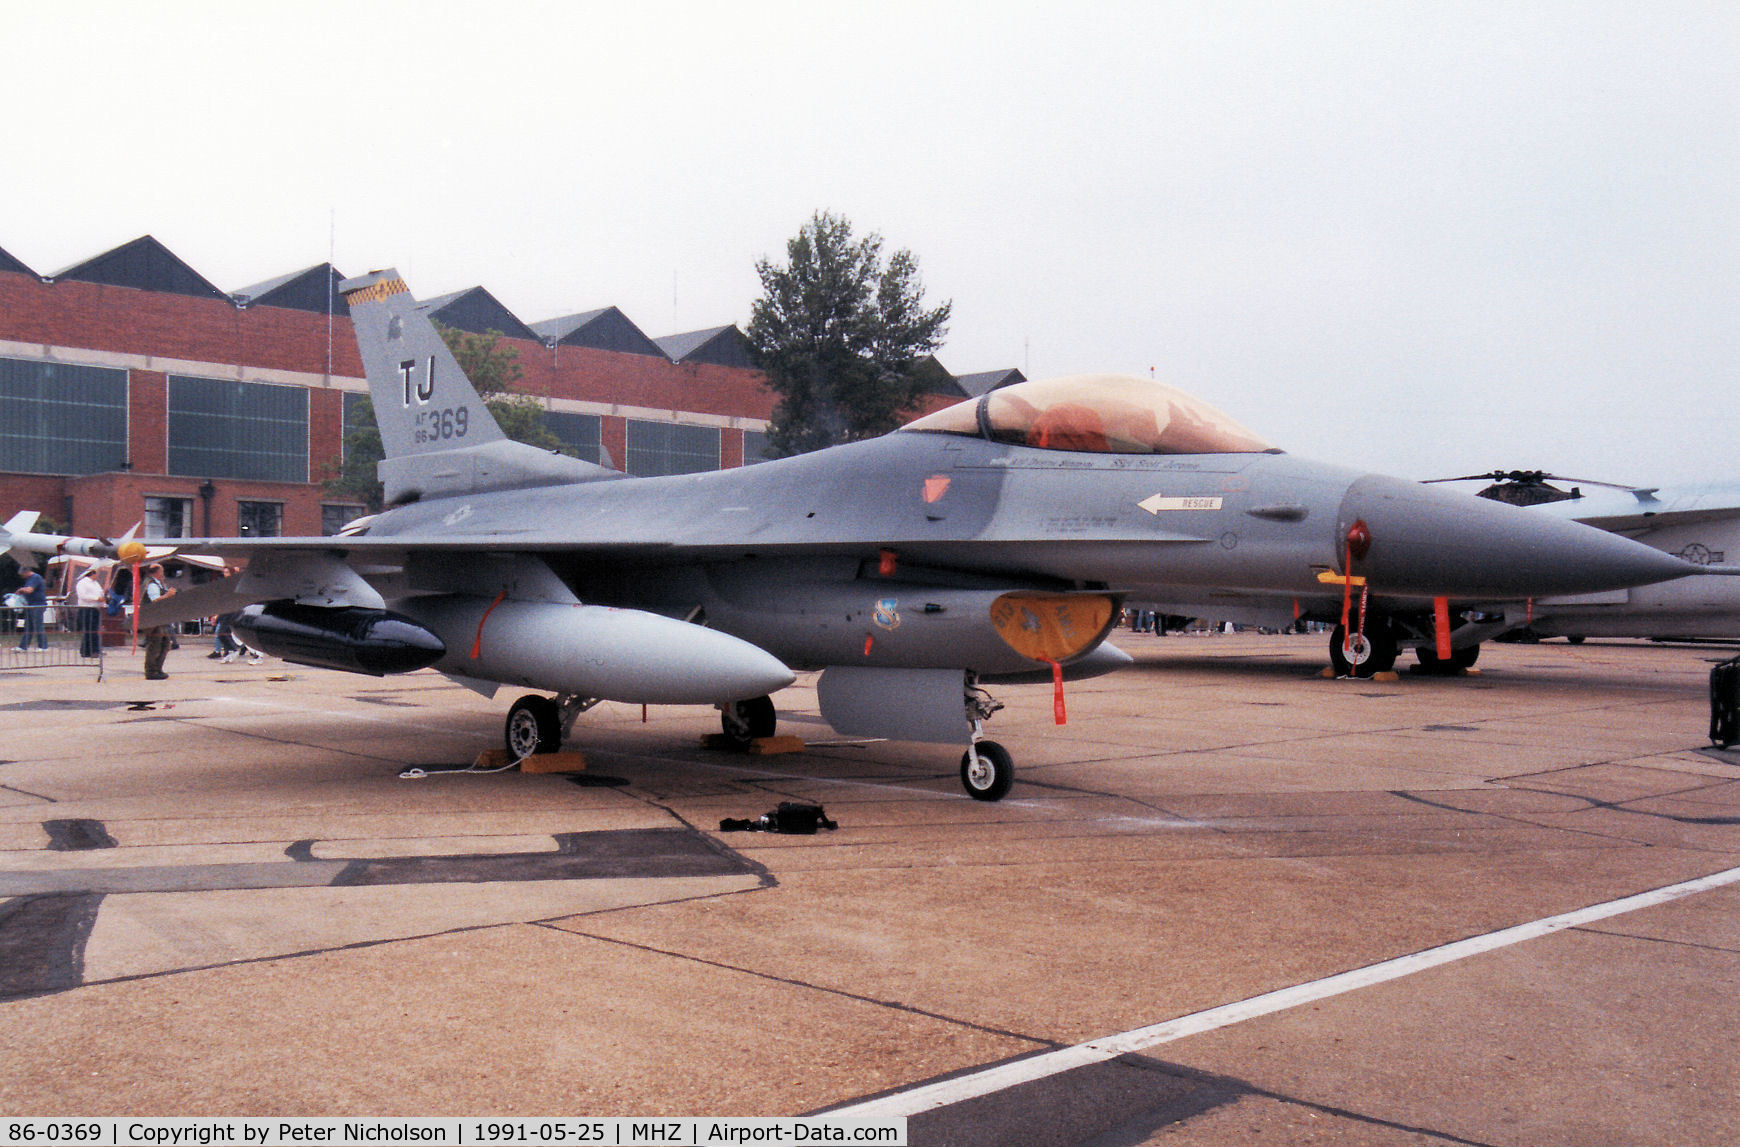 86-0369, 1987 General Dynamics F-16C Fighting Falcon C/N 5C-475, F-16C Falcon of Torrejon's 613rd Tactical Fighter Squadron/401st Tactical Fighter Wing on display at the 1991 Mildenhall Air Fete.